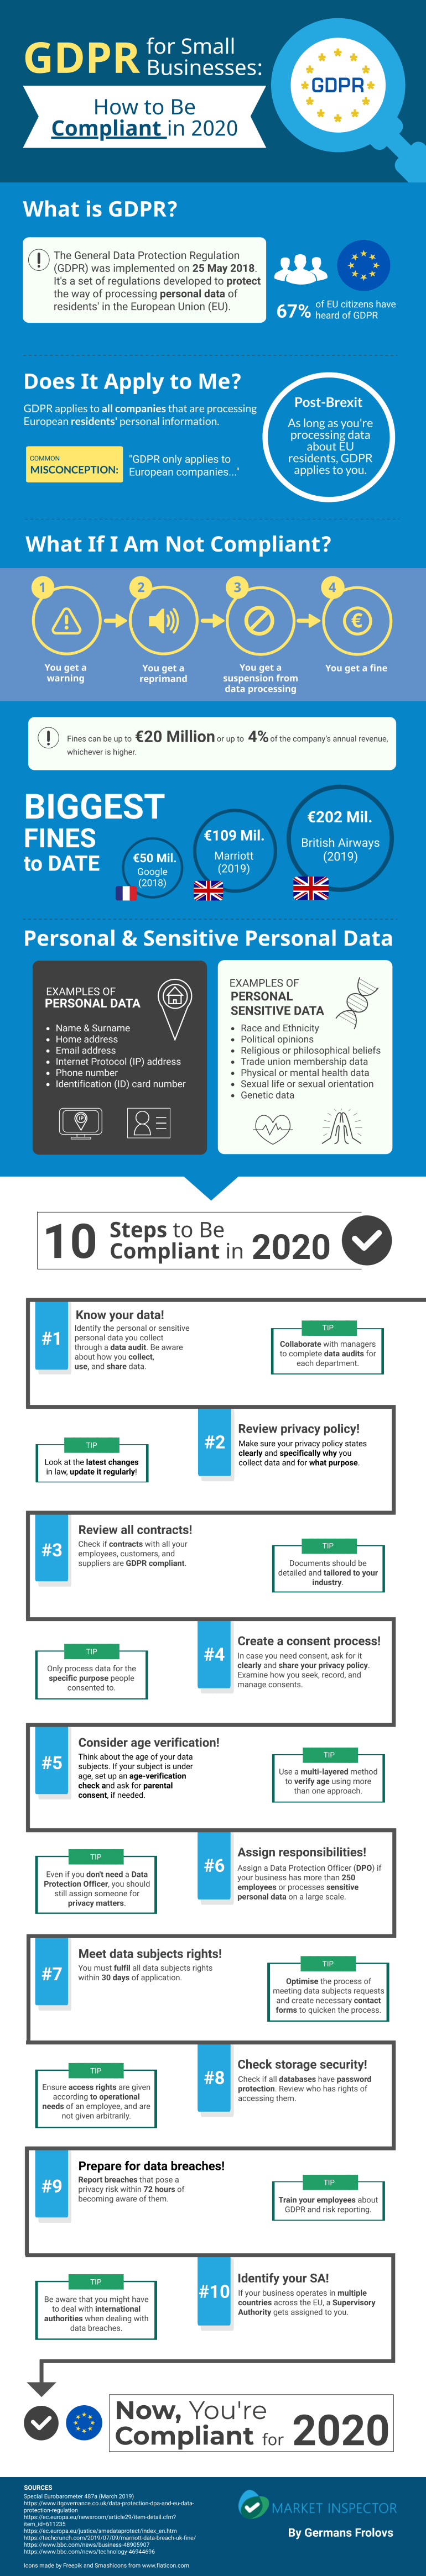 Infographic About GDPR for Small Businesses